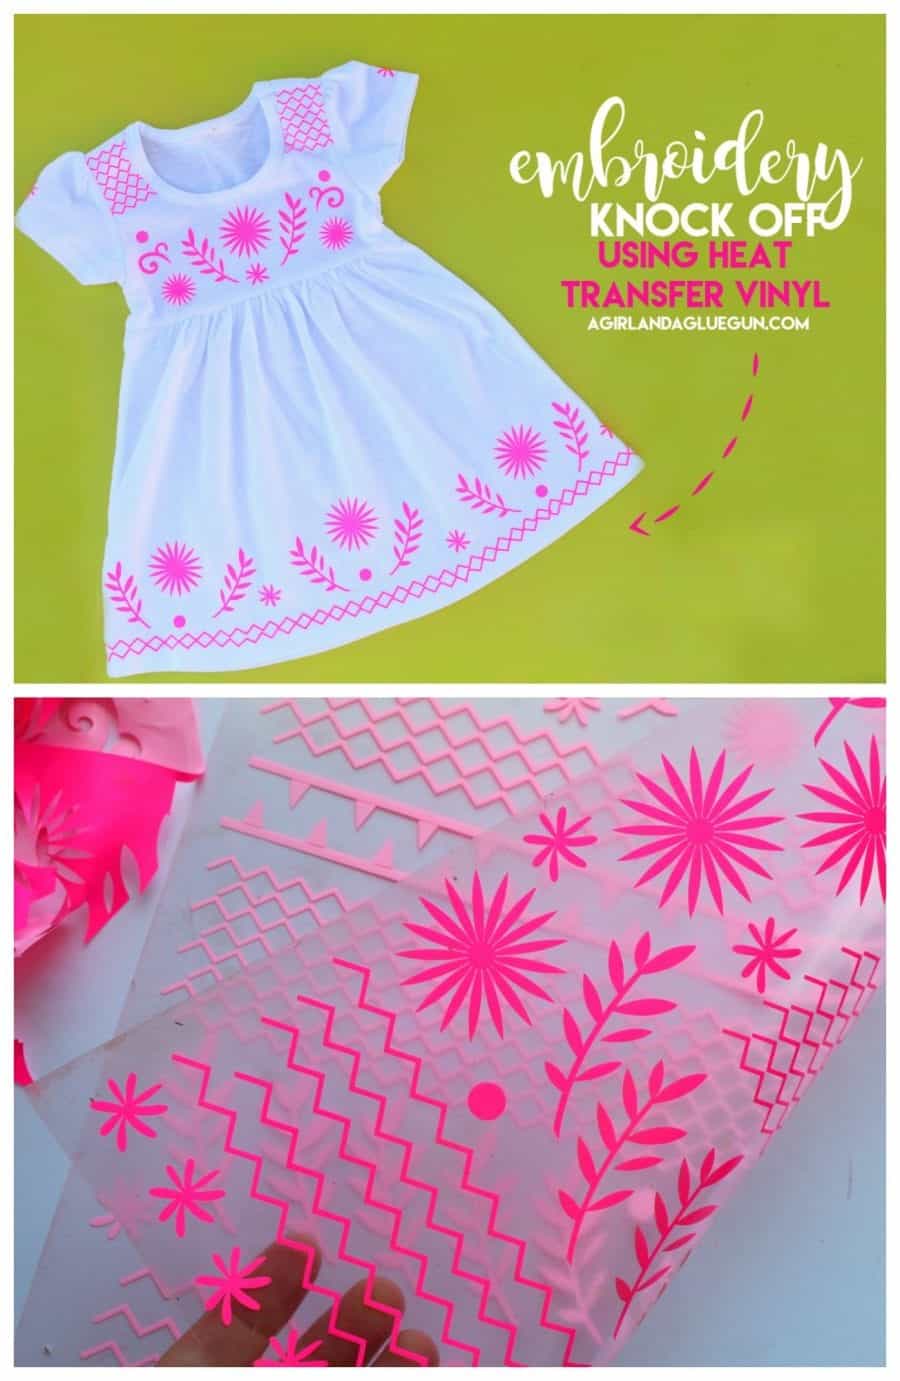 make a faux embroidery dress knock off using some awesome iron on heat transfer vinyl from expressions vinyl